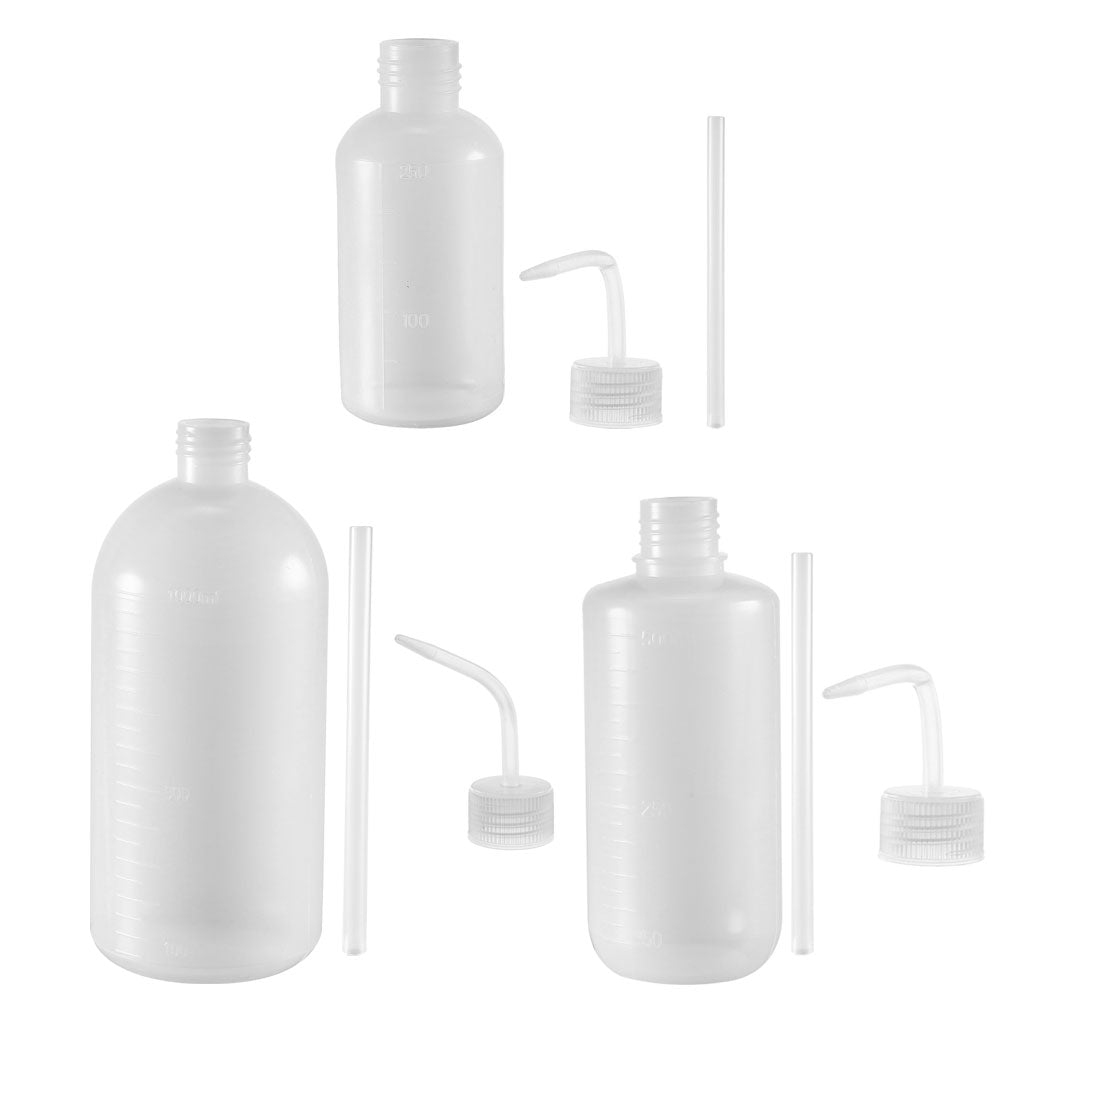 uxcell Uxcell Plastic Wash Bottle Squeeze Bottle 250ml+500ml+1000ml Narrow Mouth Lab Tip Liquid Storage Watering Tools 3pcs